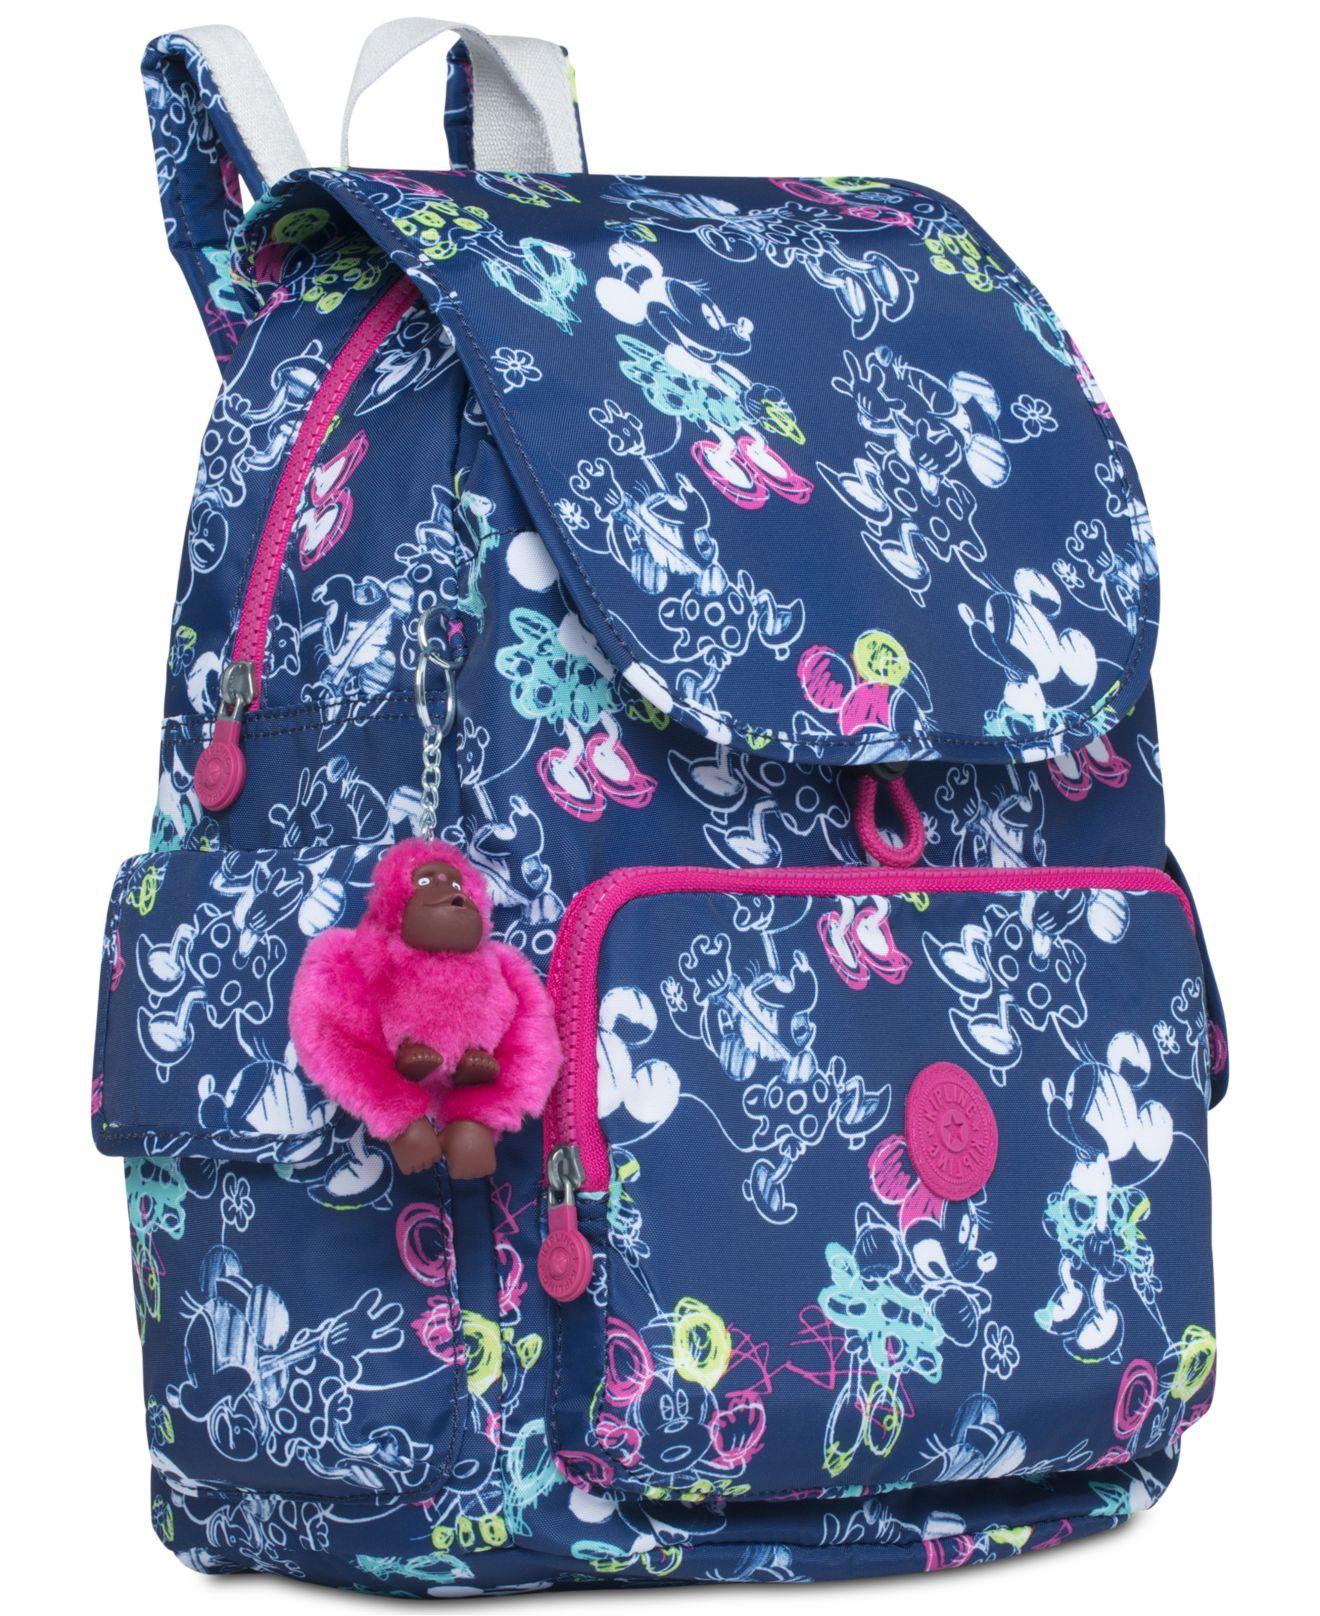 Disney Collection Mickey Mouse Backpack, Color: Blue - JCPenney